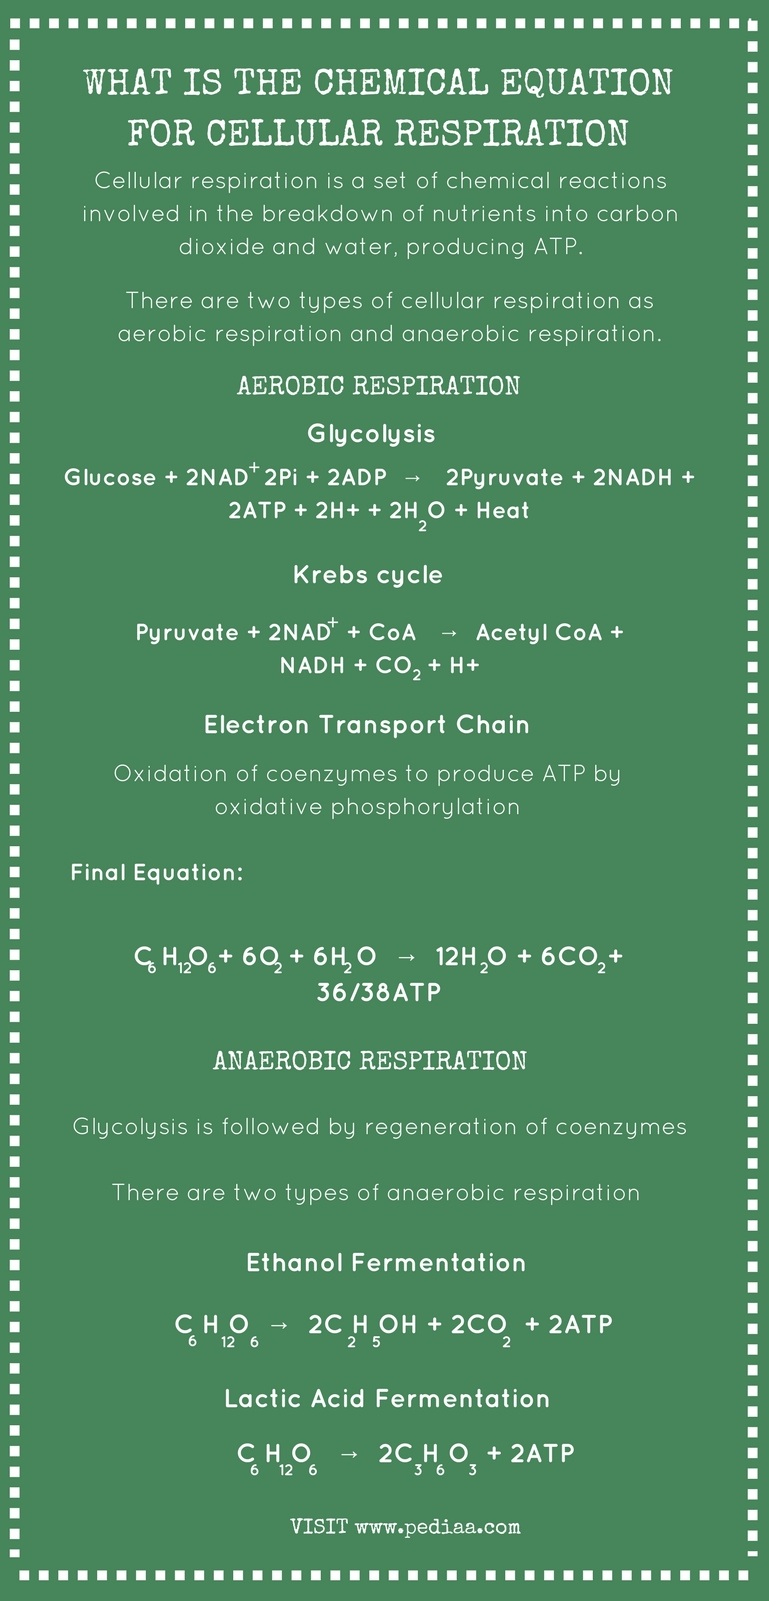 What Is The Chemical Equation For Cellular Respiration Pediaa Com